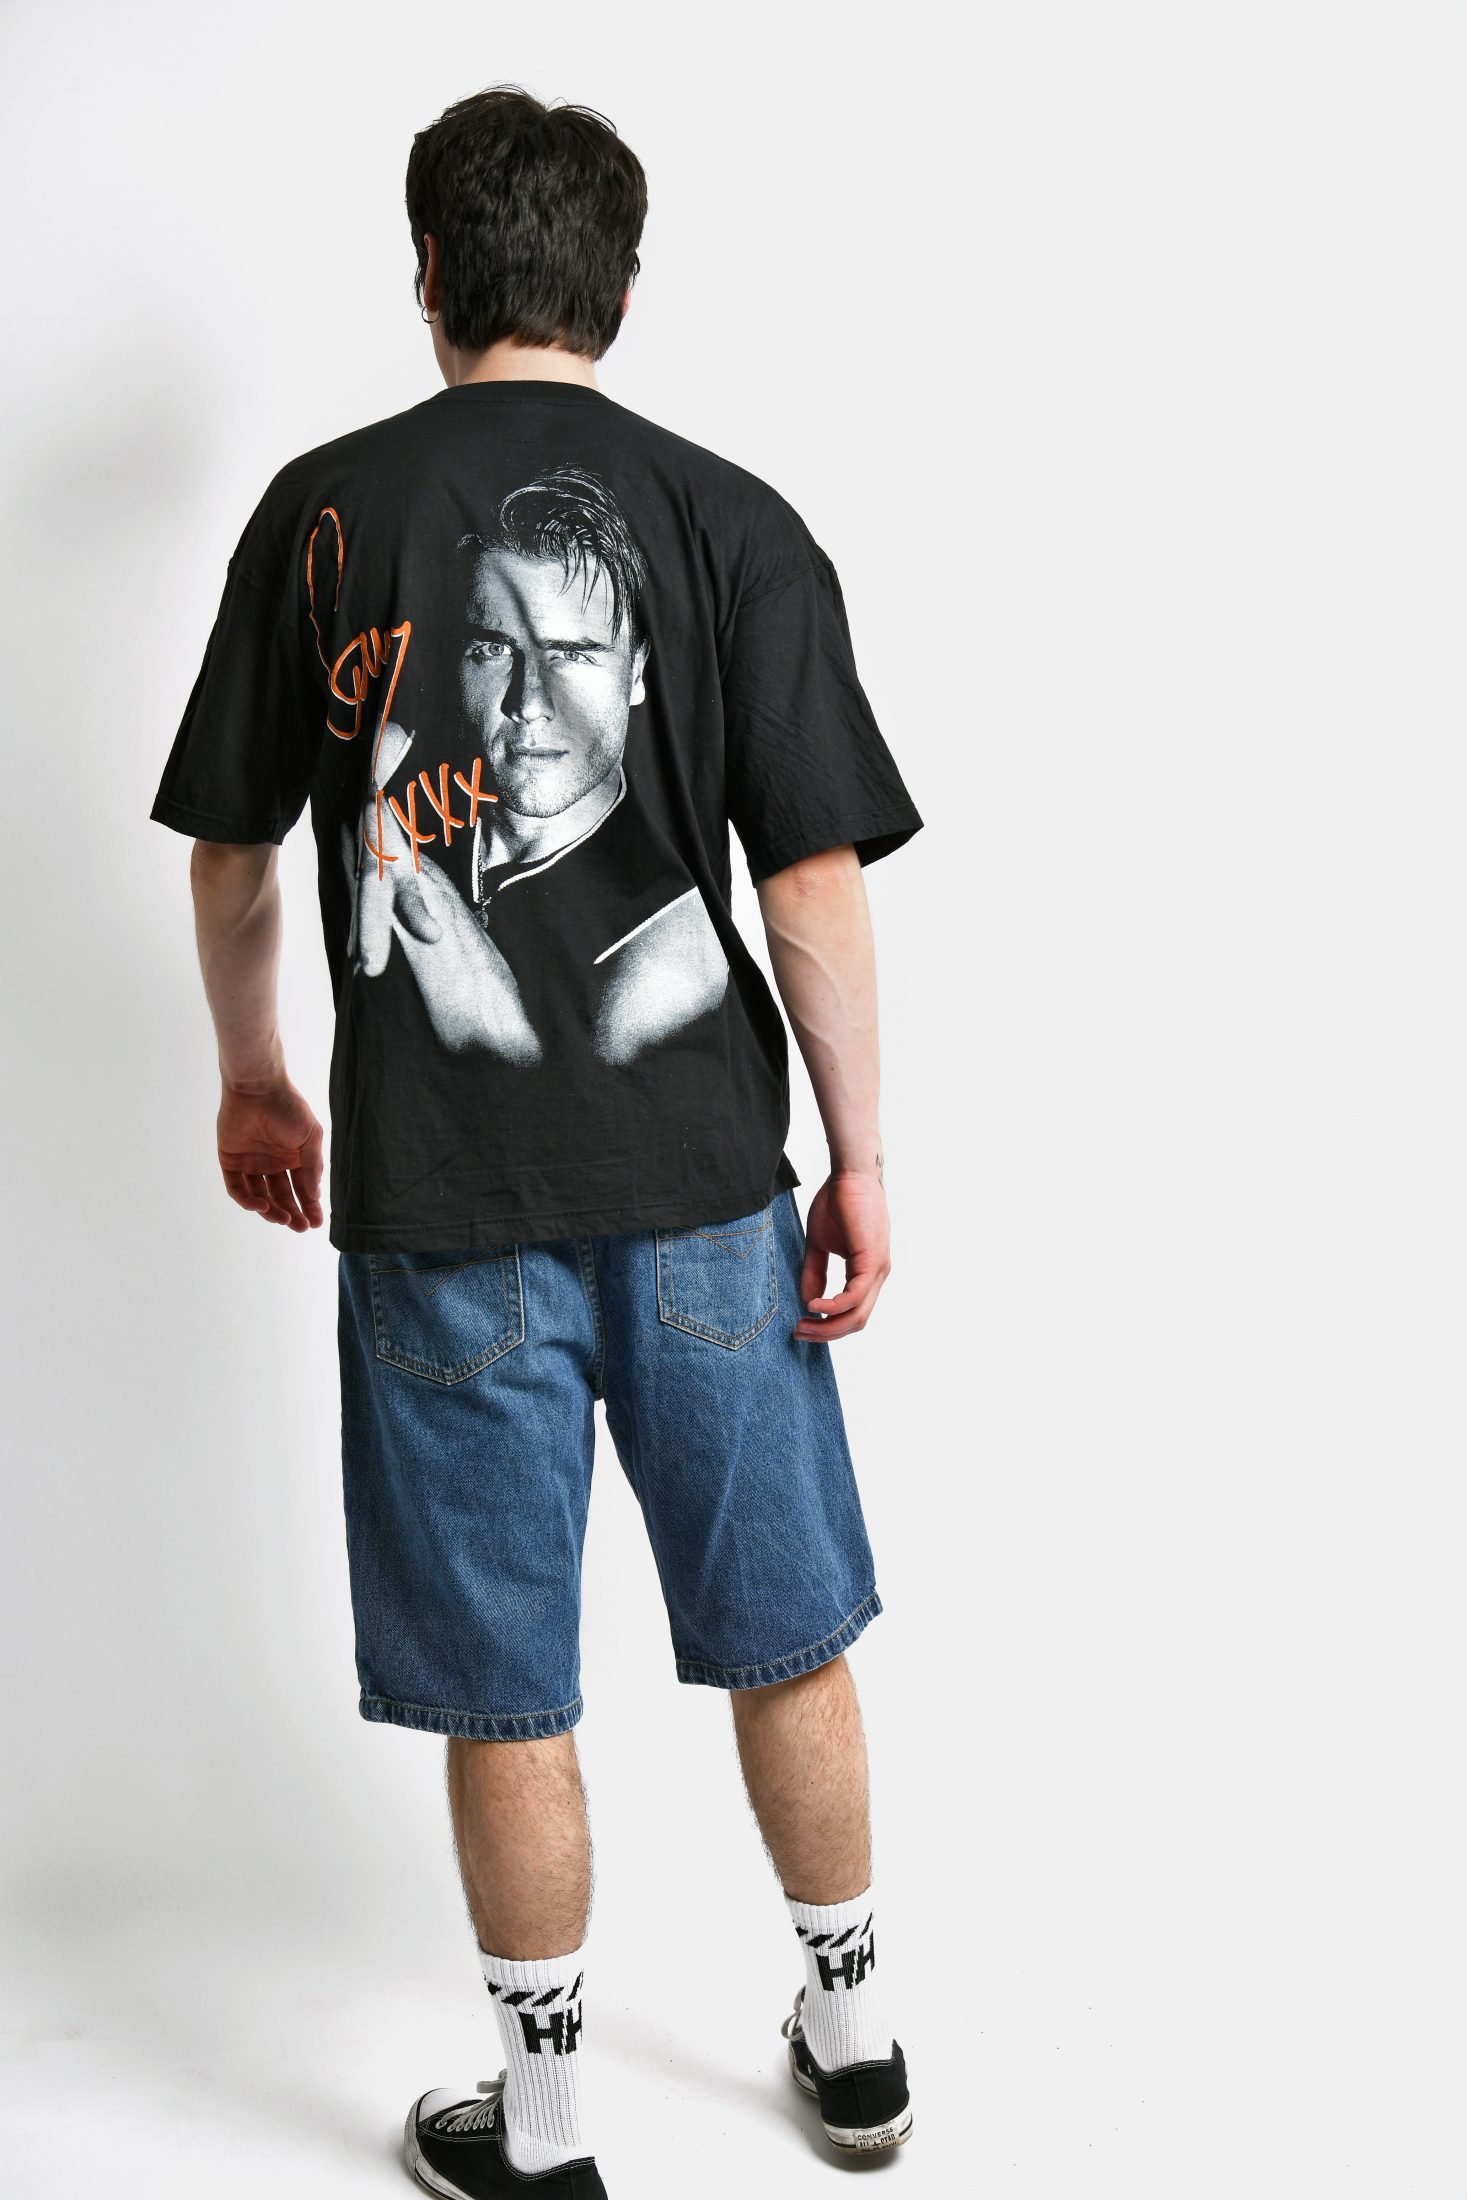 Gary Barlow t-shirt 90s | Vintage clothes online for men